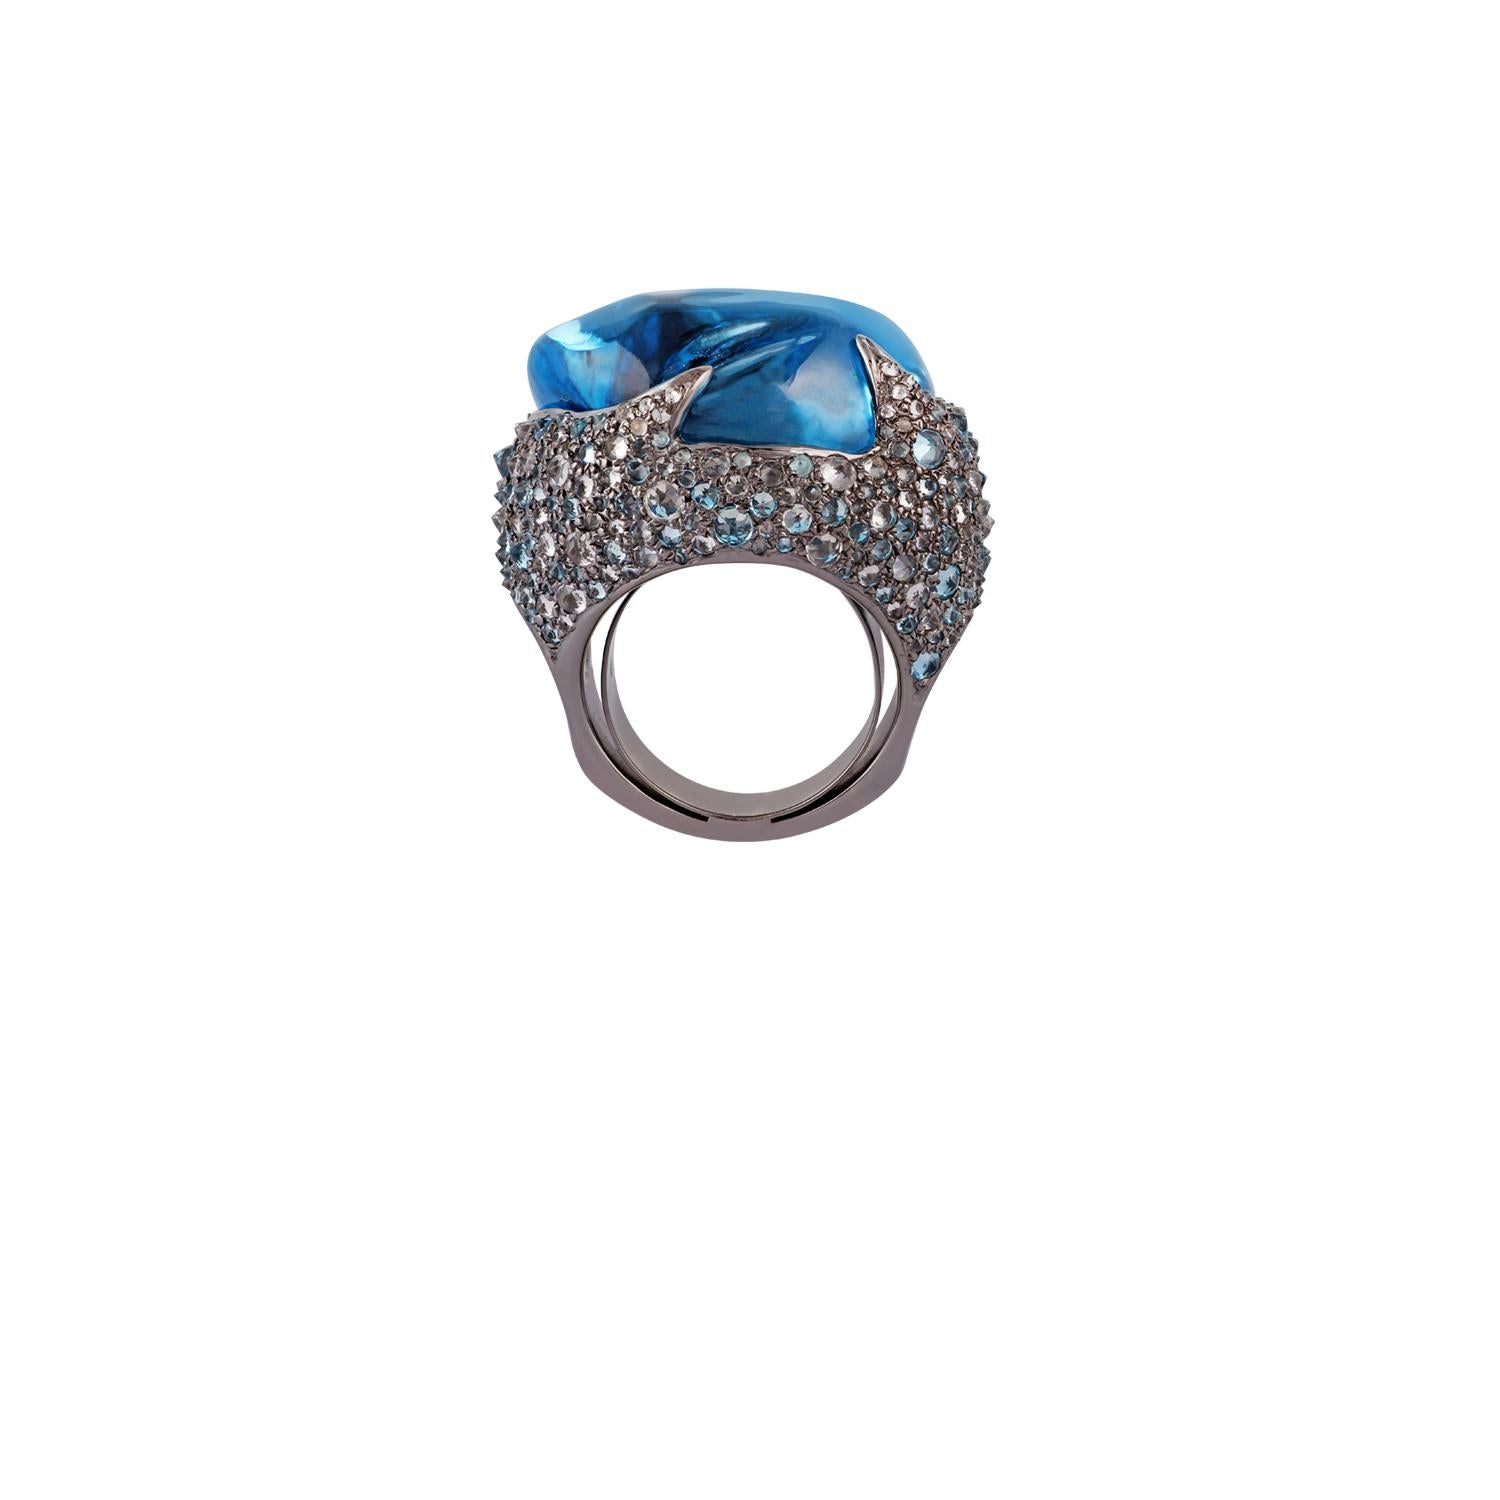 Sugarloaf Cabochon Antique Victorian Blue Topaz, White Topaz, Diamond Ring in Gold & Silver For Sale